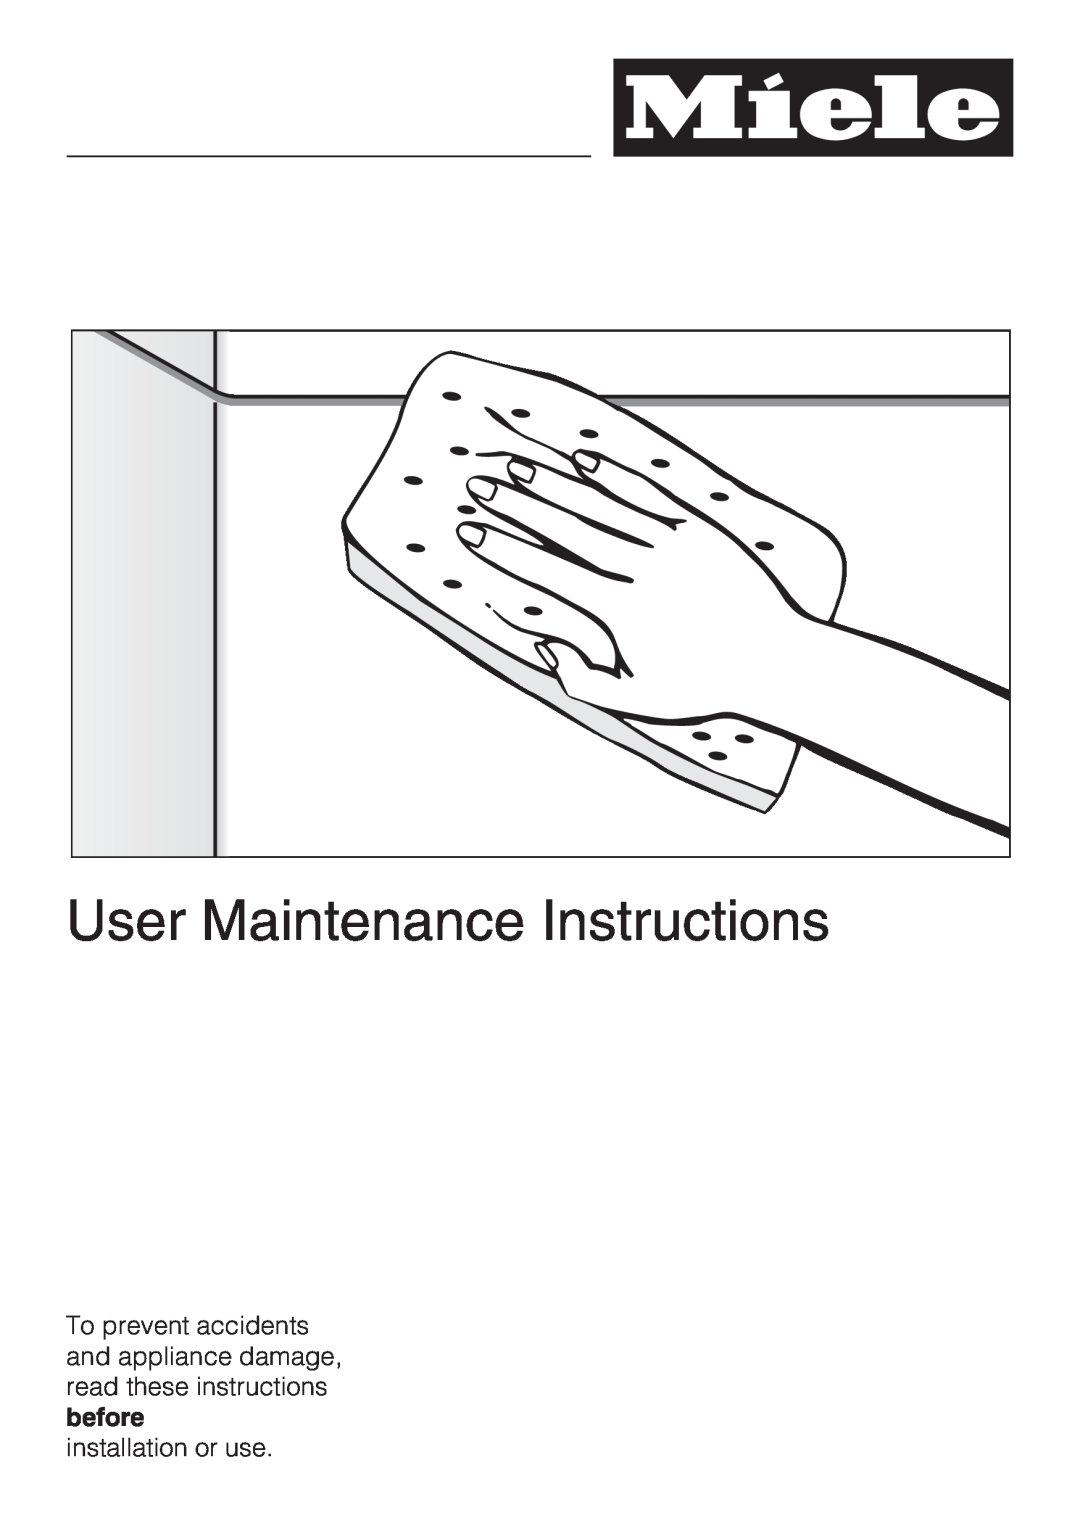 Miele G 5815, G 5810 manual User Maintenance Instructions, installation or use 